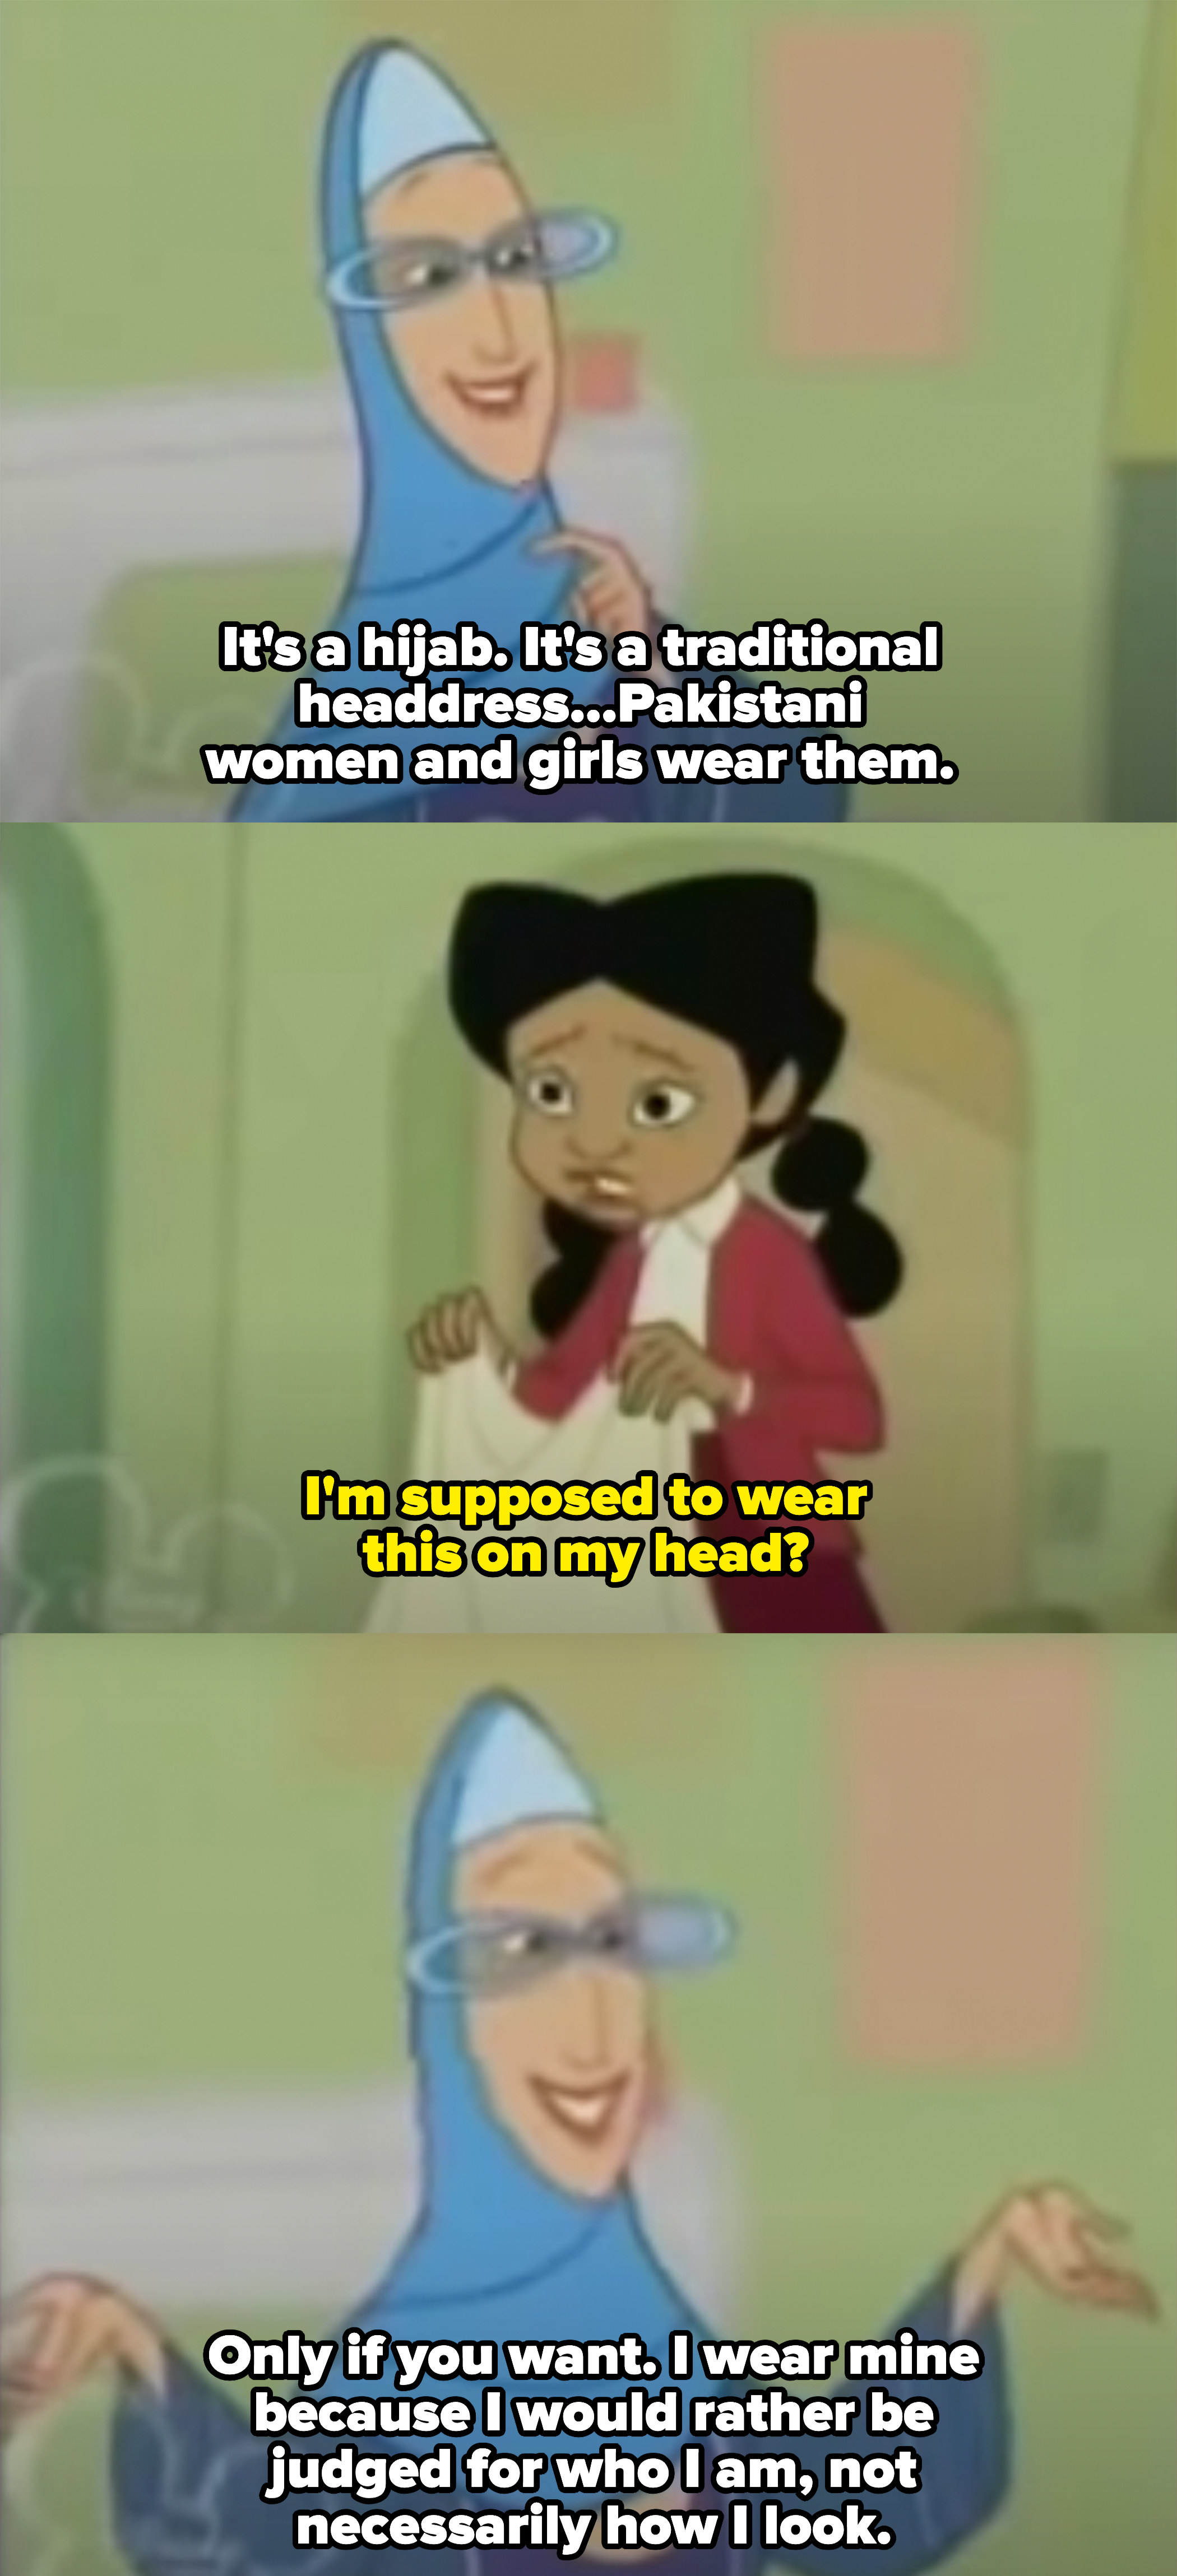 A Muslim woman teaching a character about a hijab